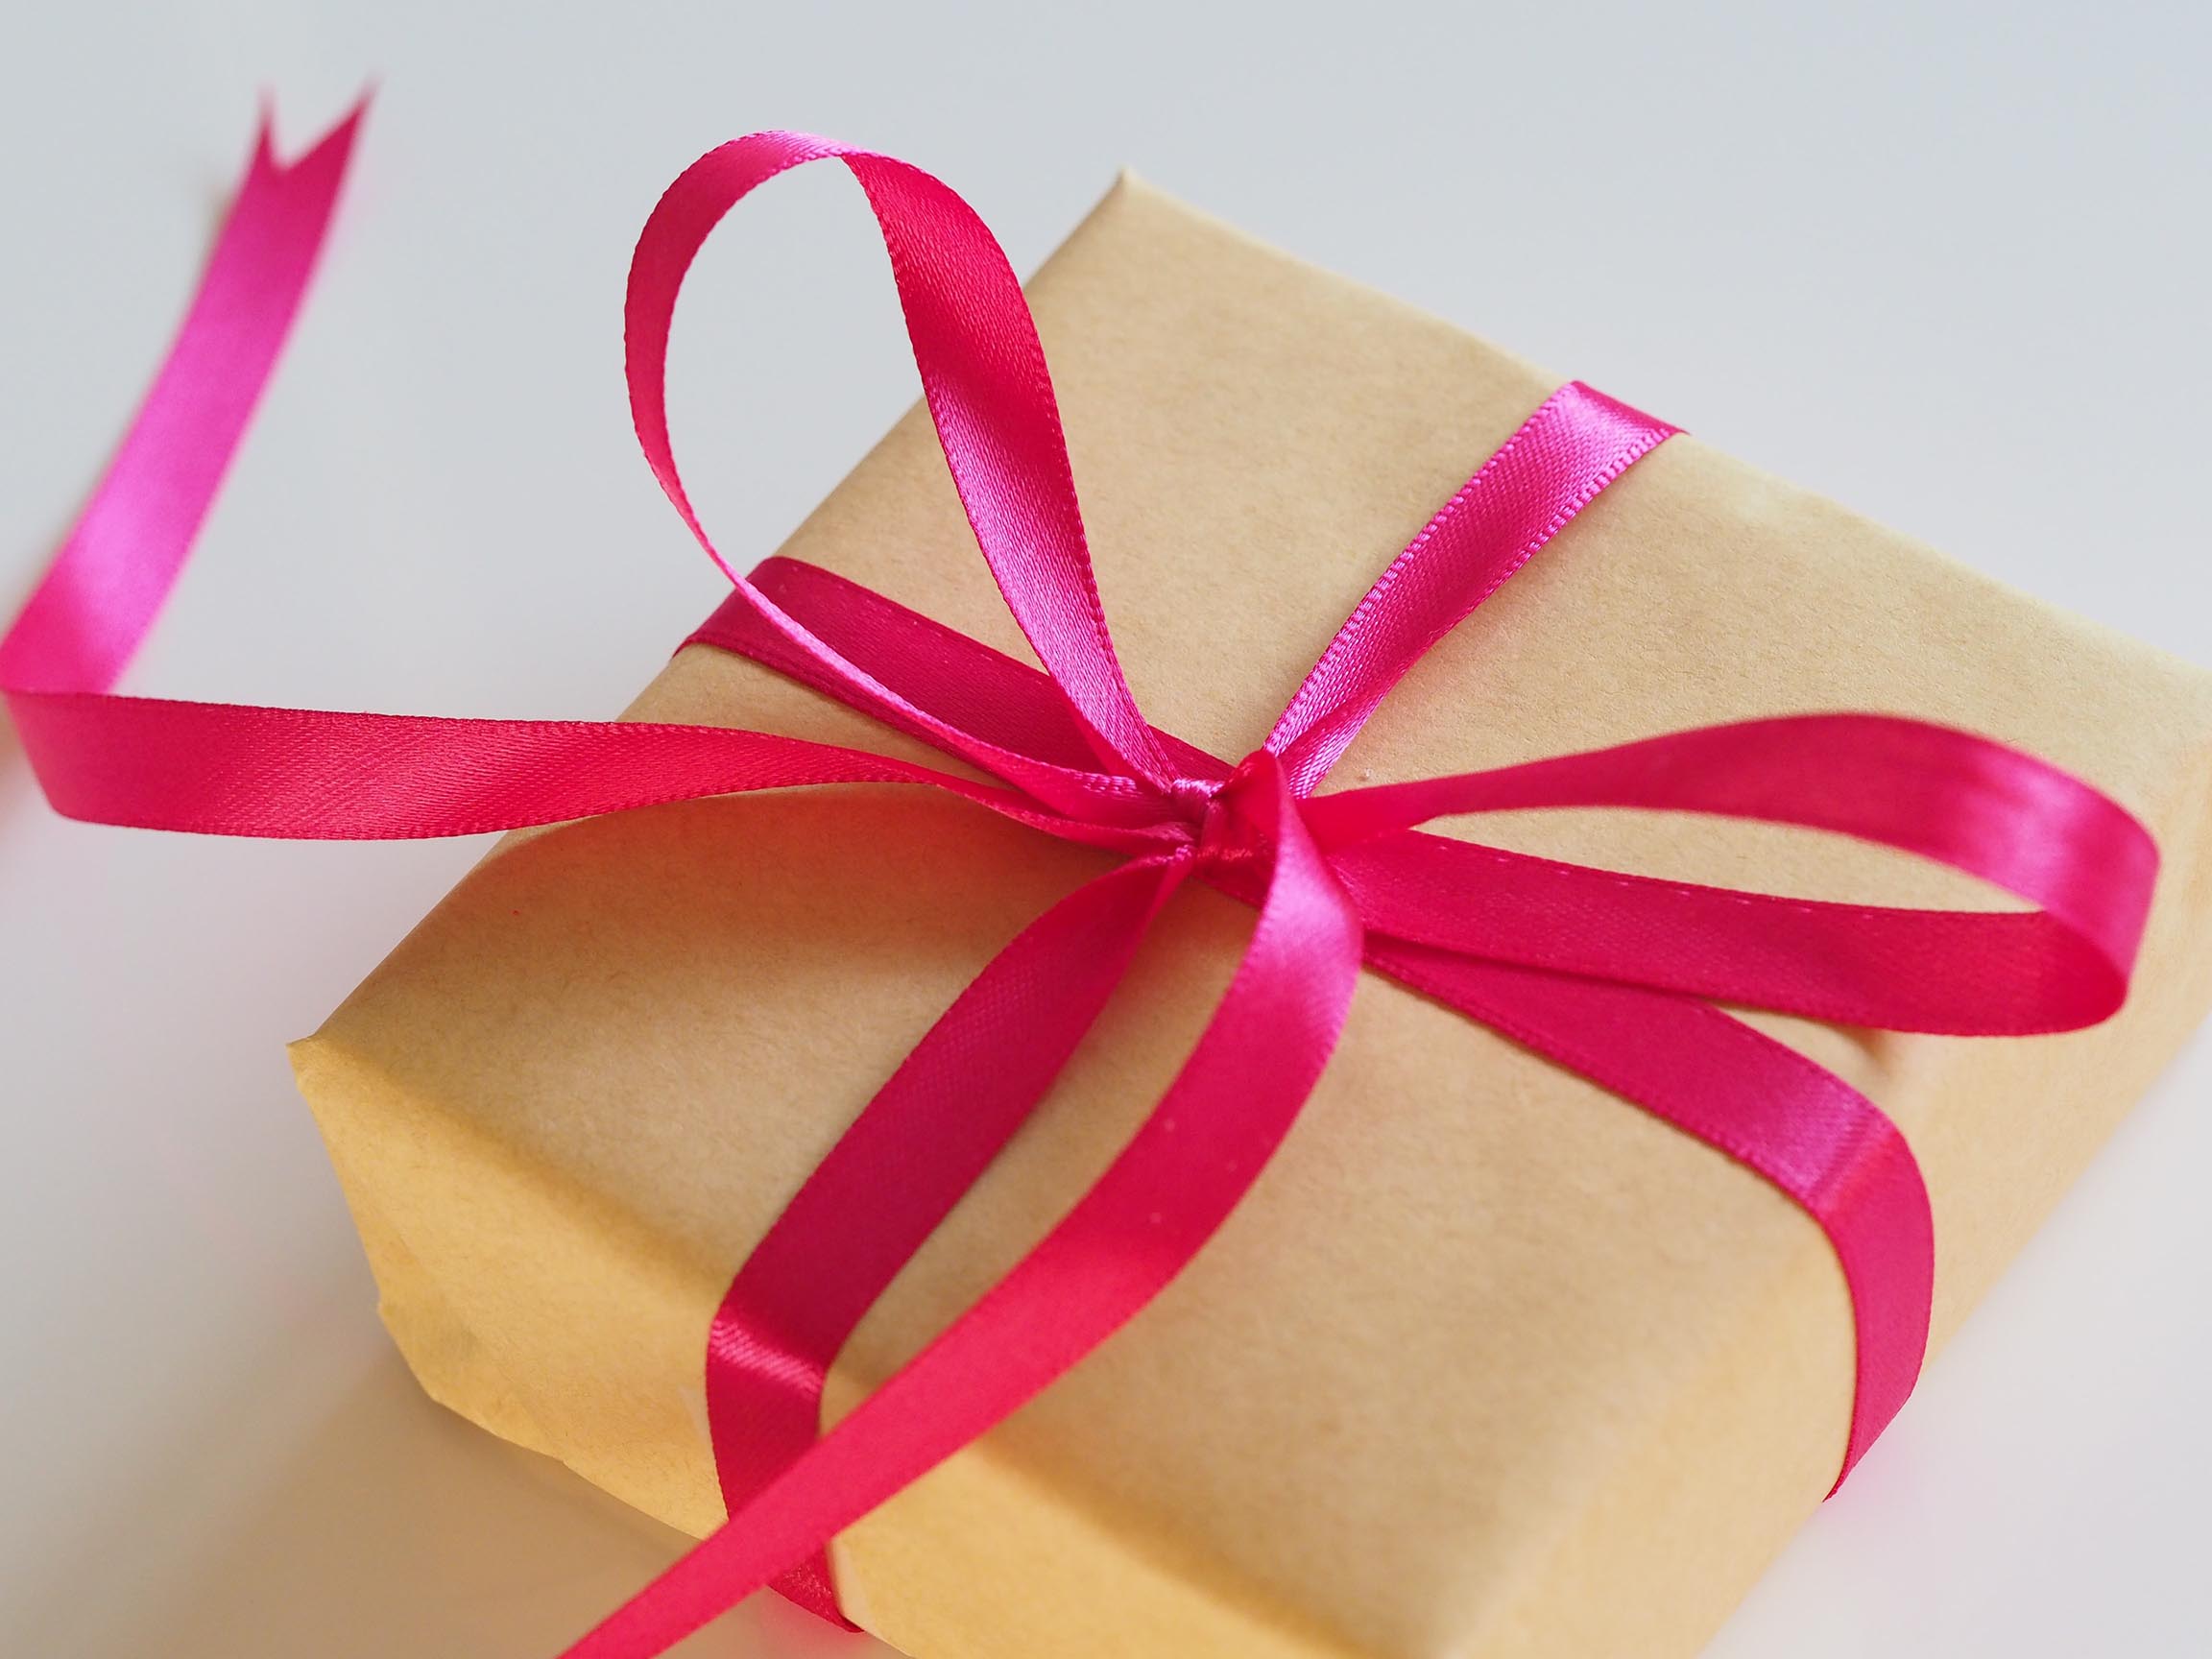 Image of a gift wrapped in paper tied with a ribbon